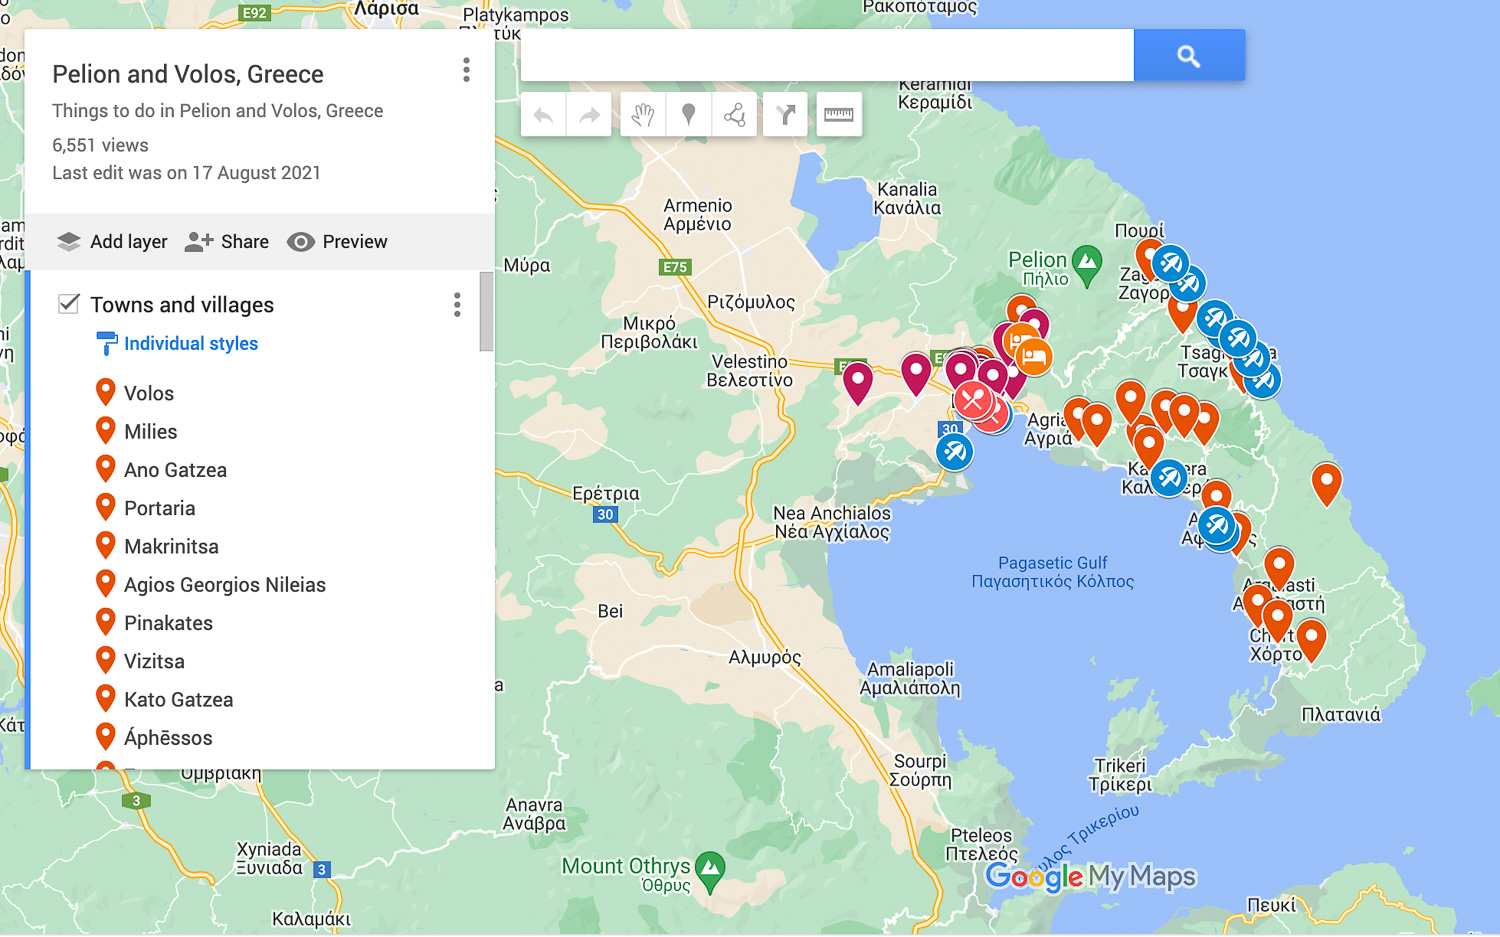 Map of Volos and the Pelion peninsula